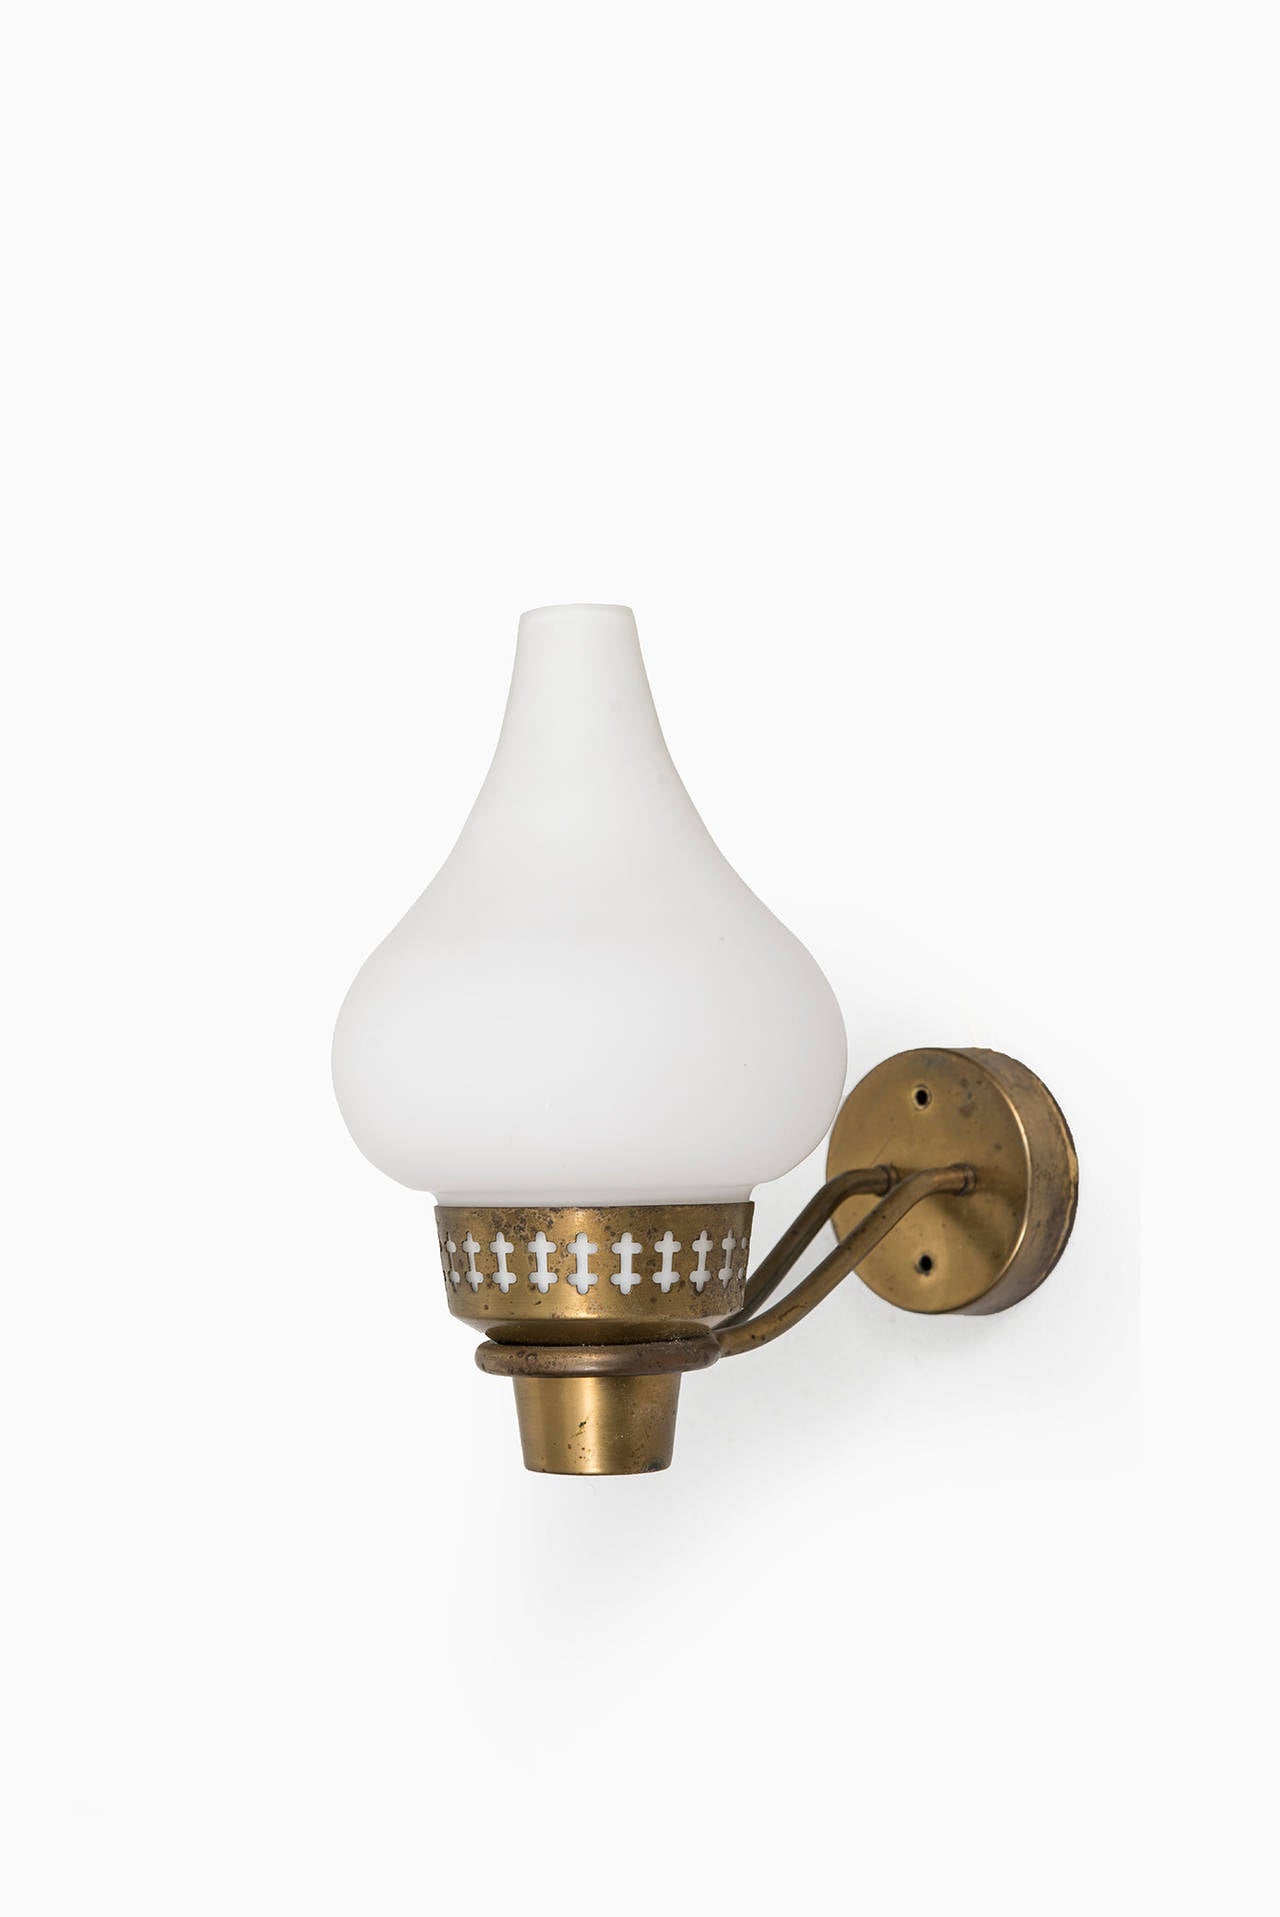 Rare set of 4 wall lamps in brass and white opal glass produced by ASEA In Sweden.